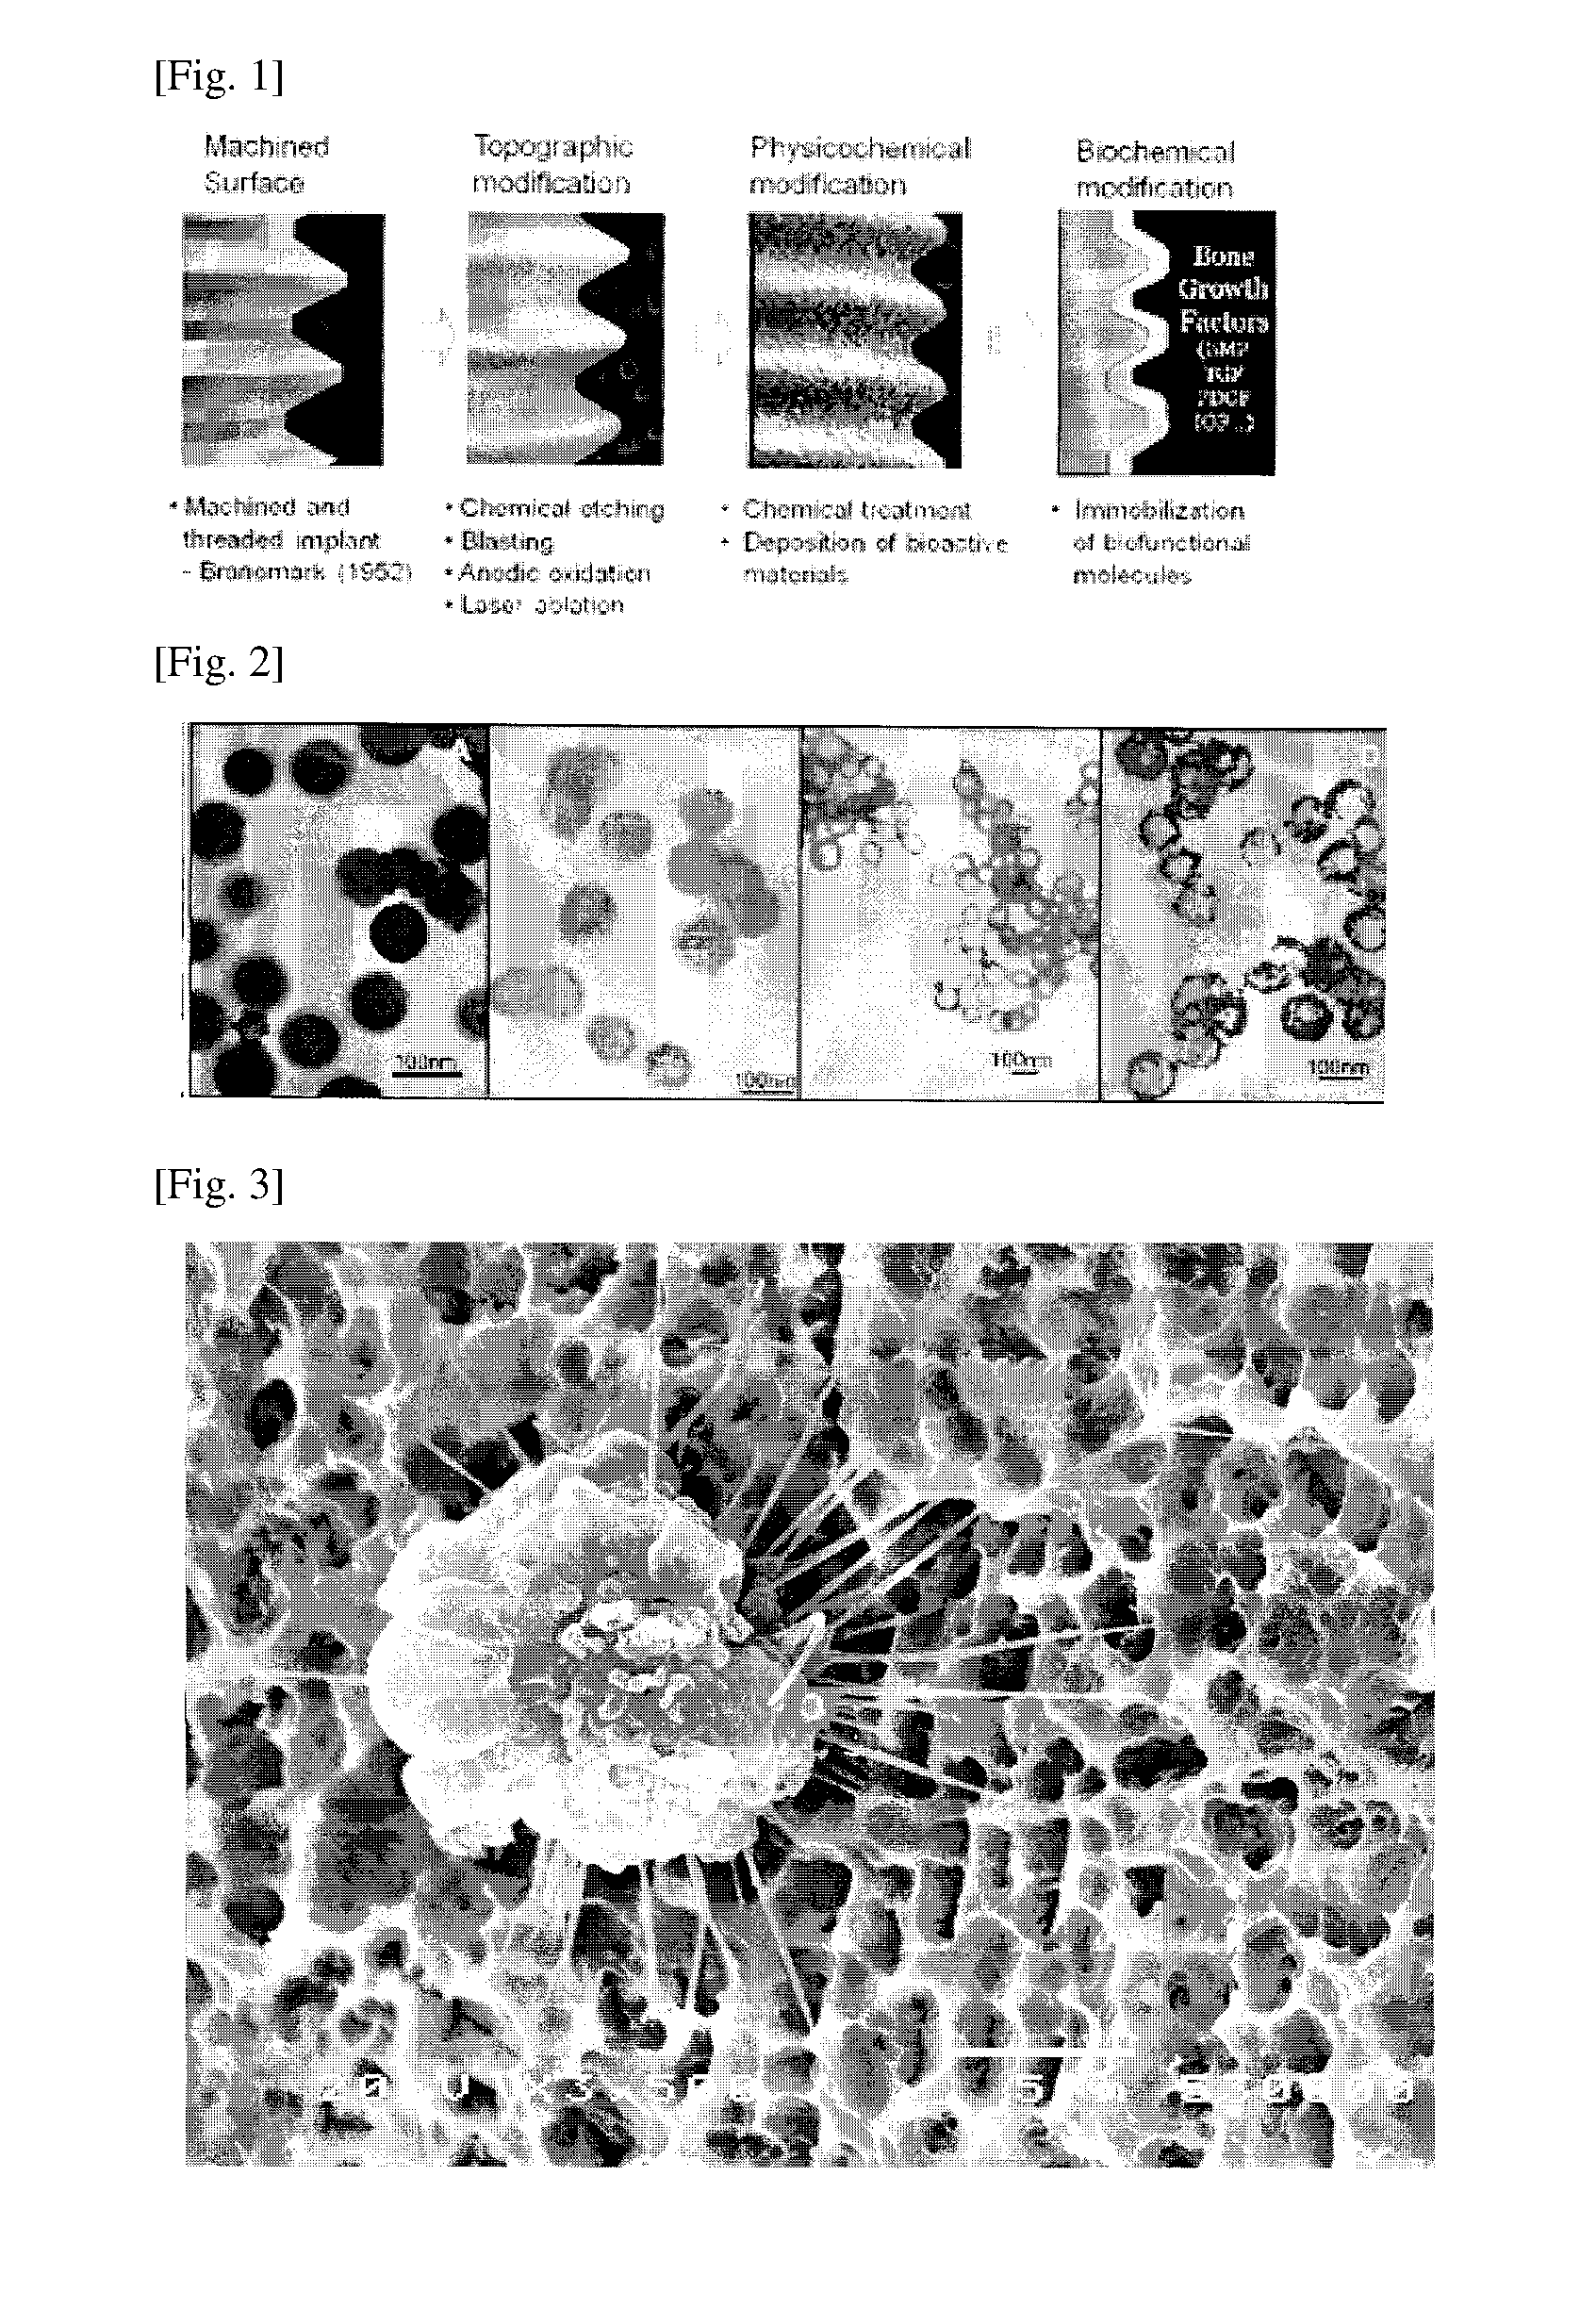 Surface-modified hybrid surface implant and method for  manufacturing the same